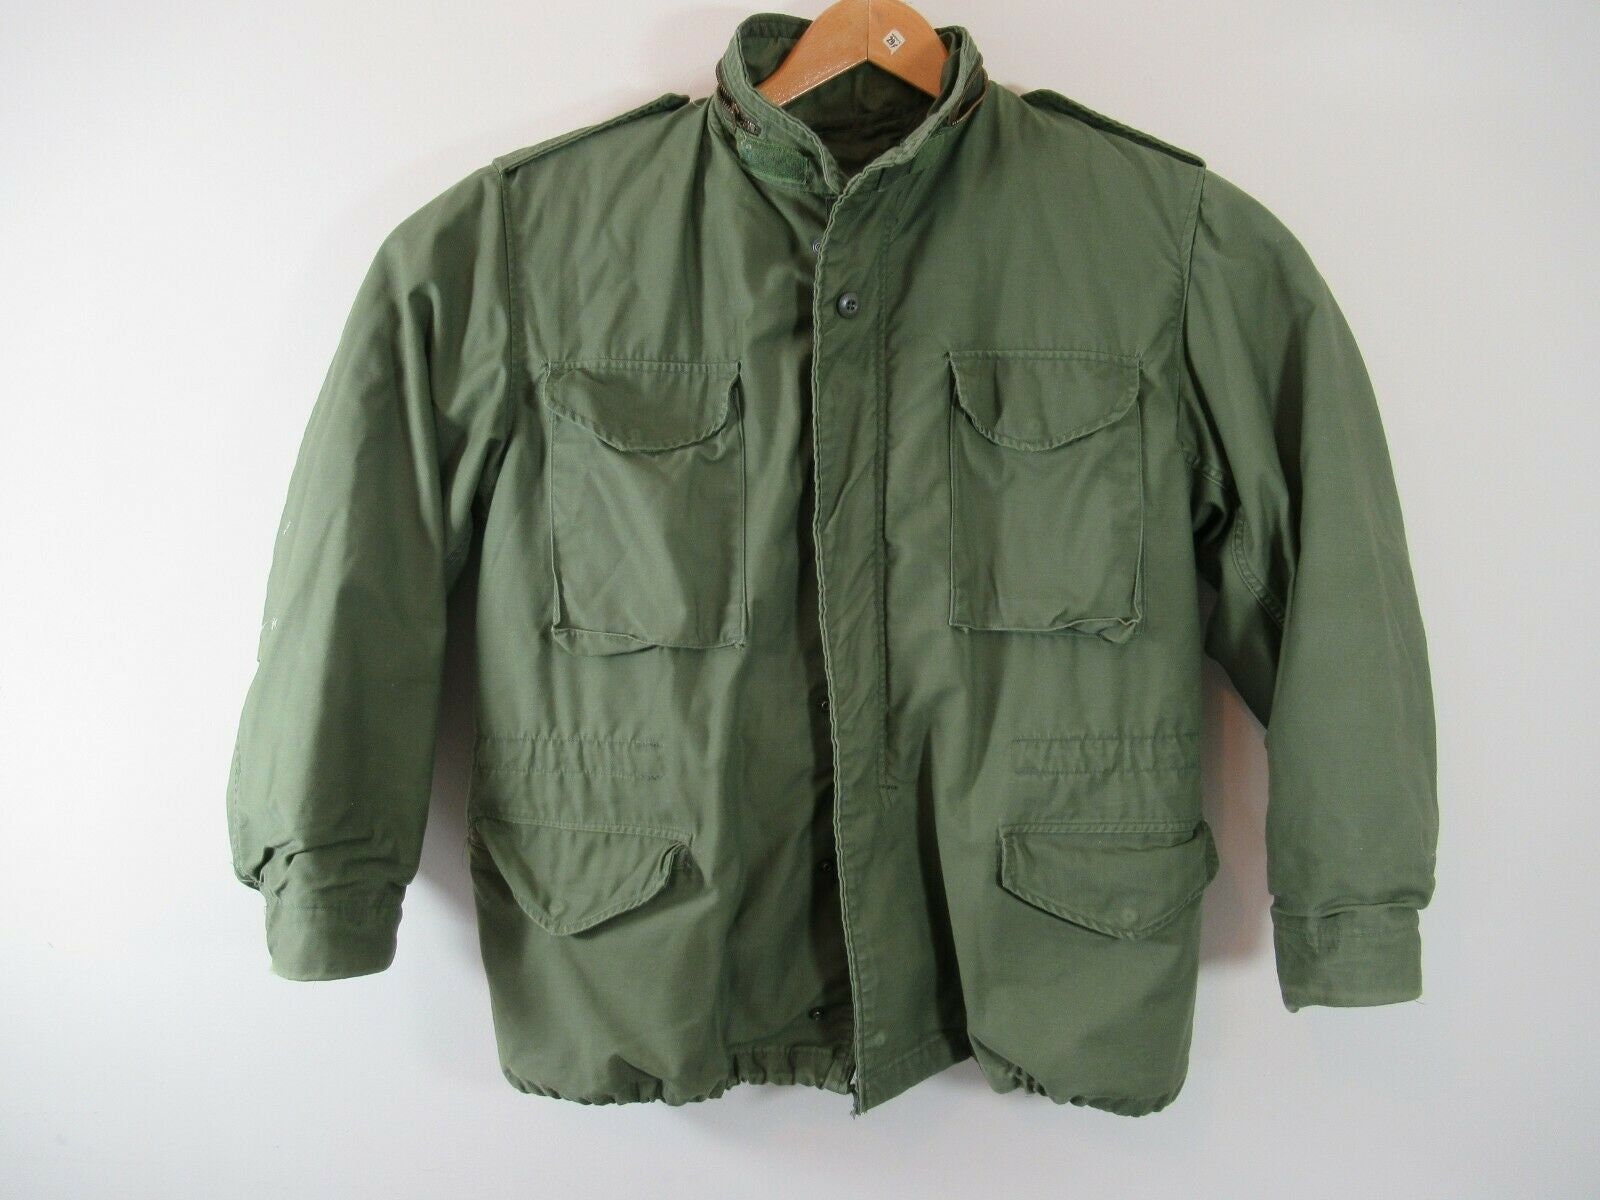 1980s Army Military Cold Weather Field Jacket Coat Green - Etsy